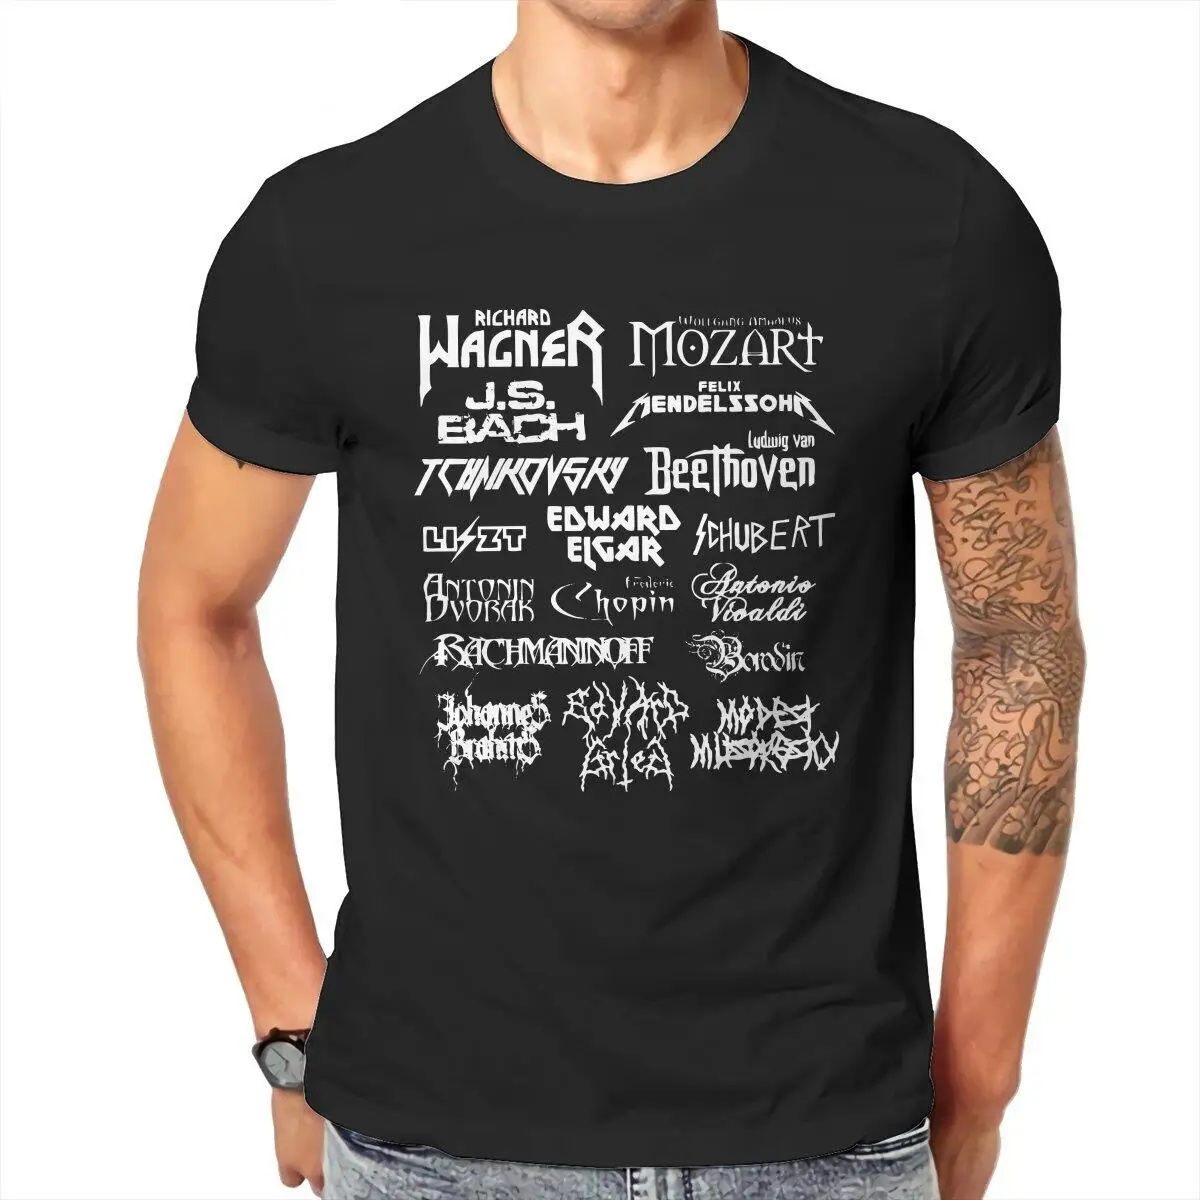 Men's T-Shirts Heavy Metal Classical Composers  Vintage Cotton Tee Shirt Short Sleeve  T Shirts Crew Neck Tops Summer